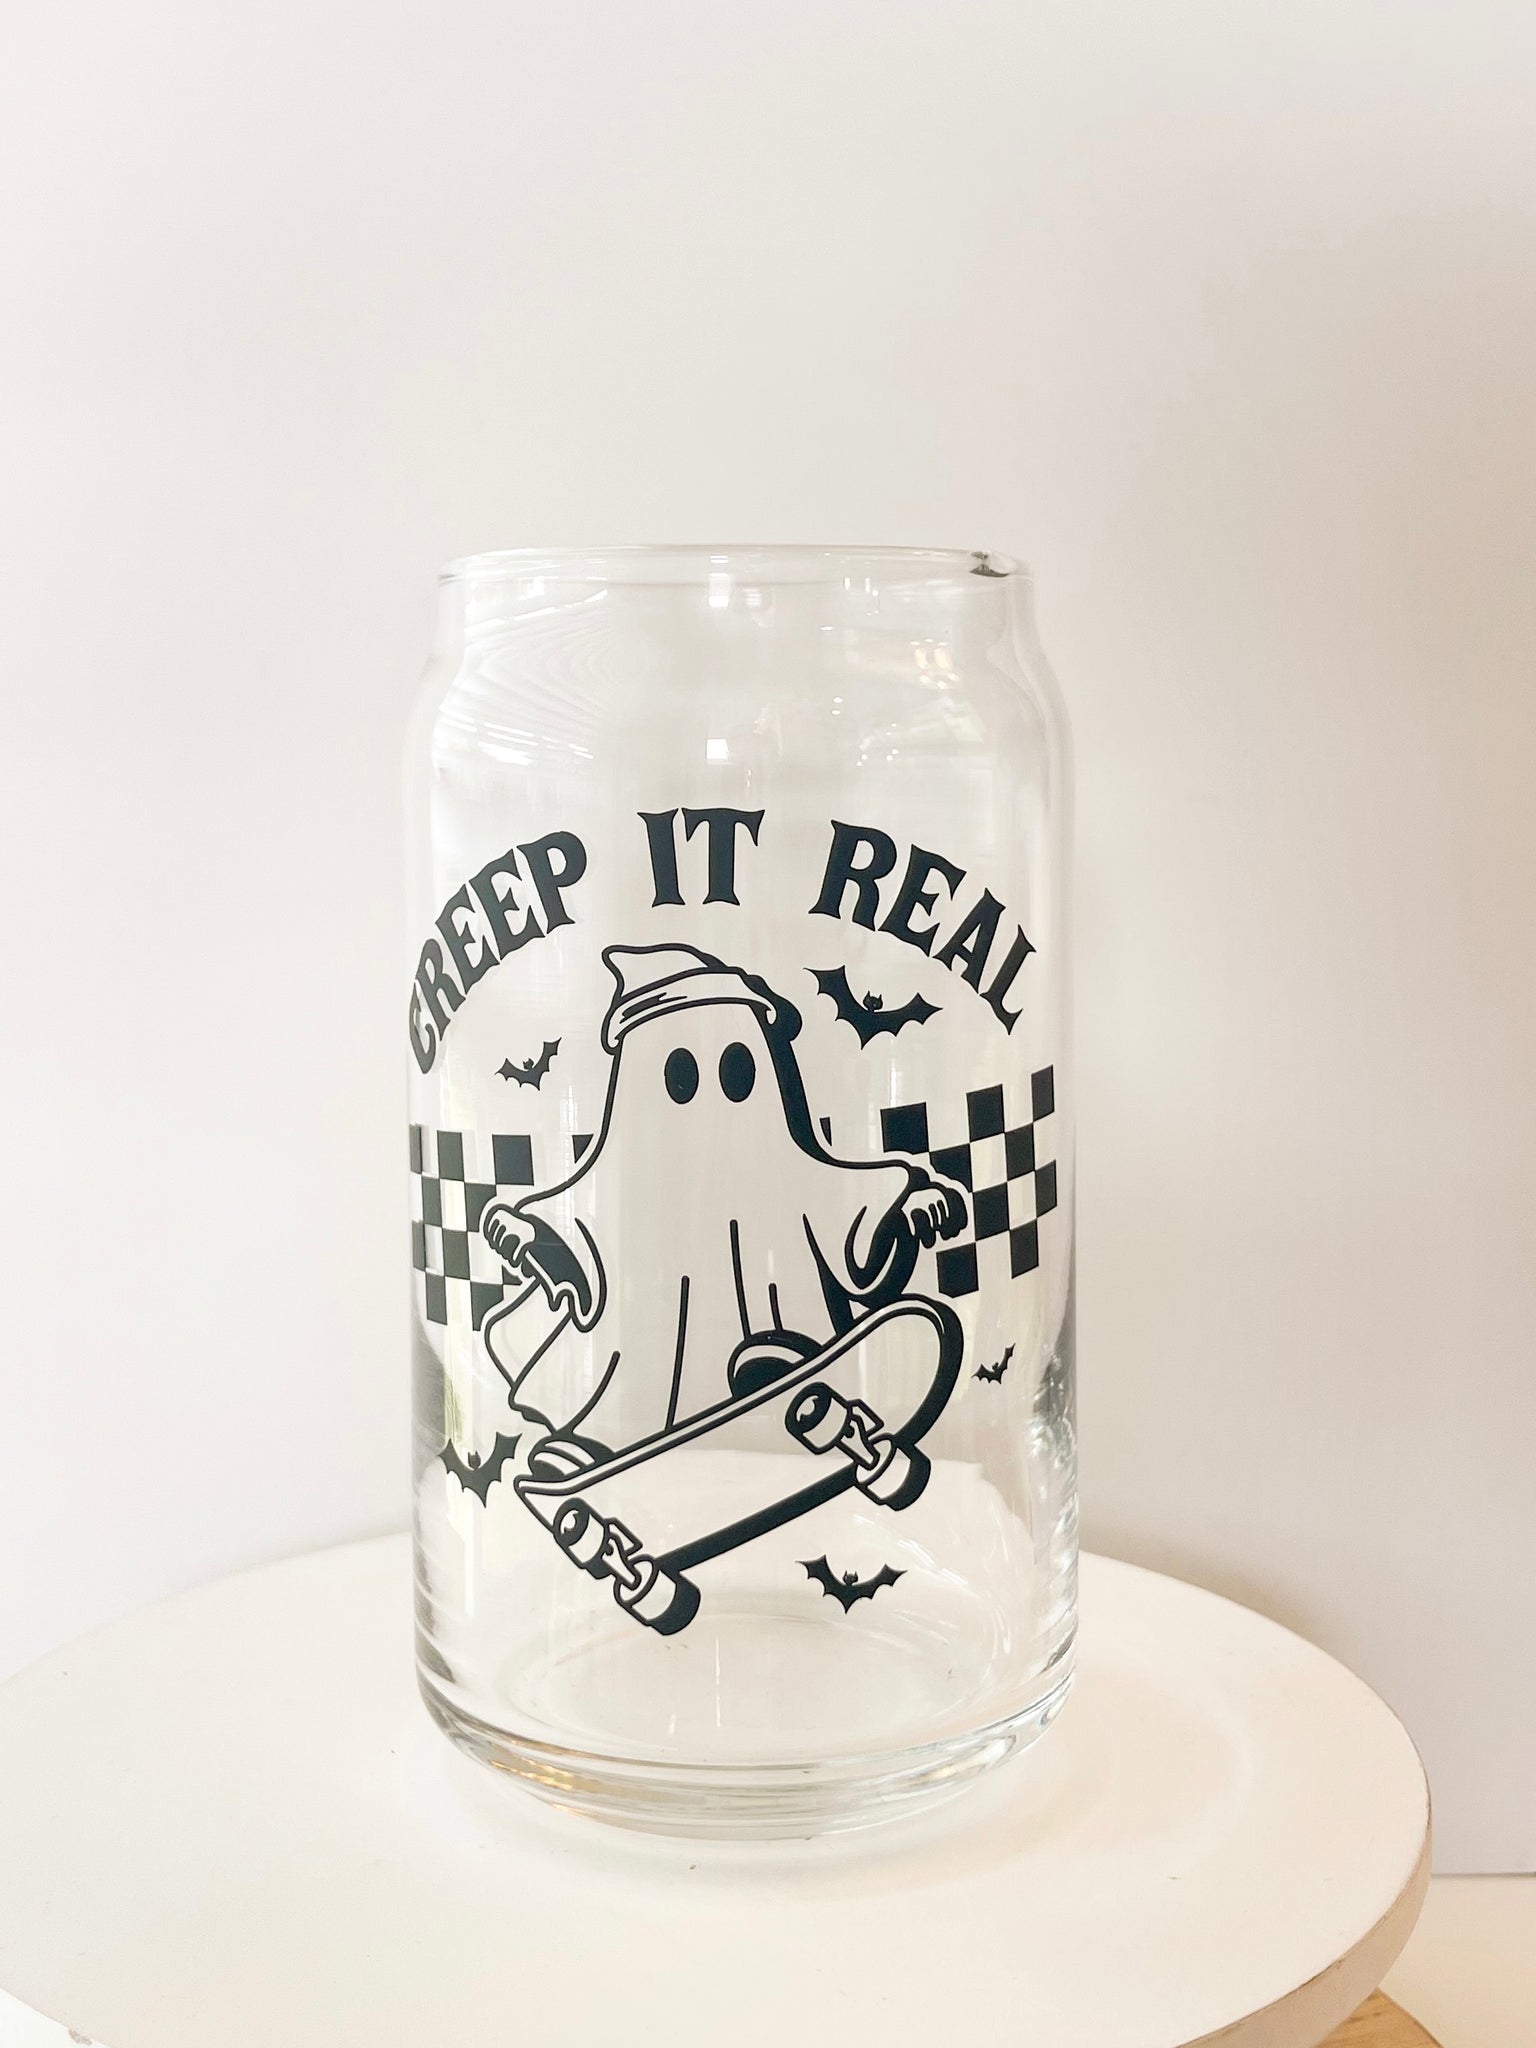 16 oz Creep it real Can Glass